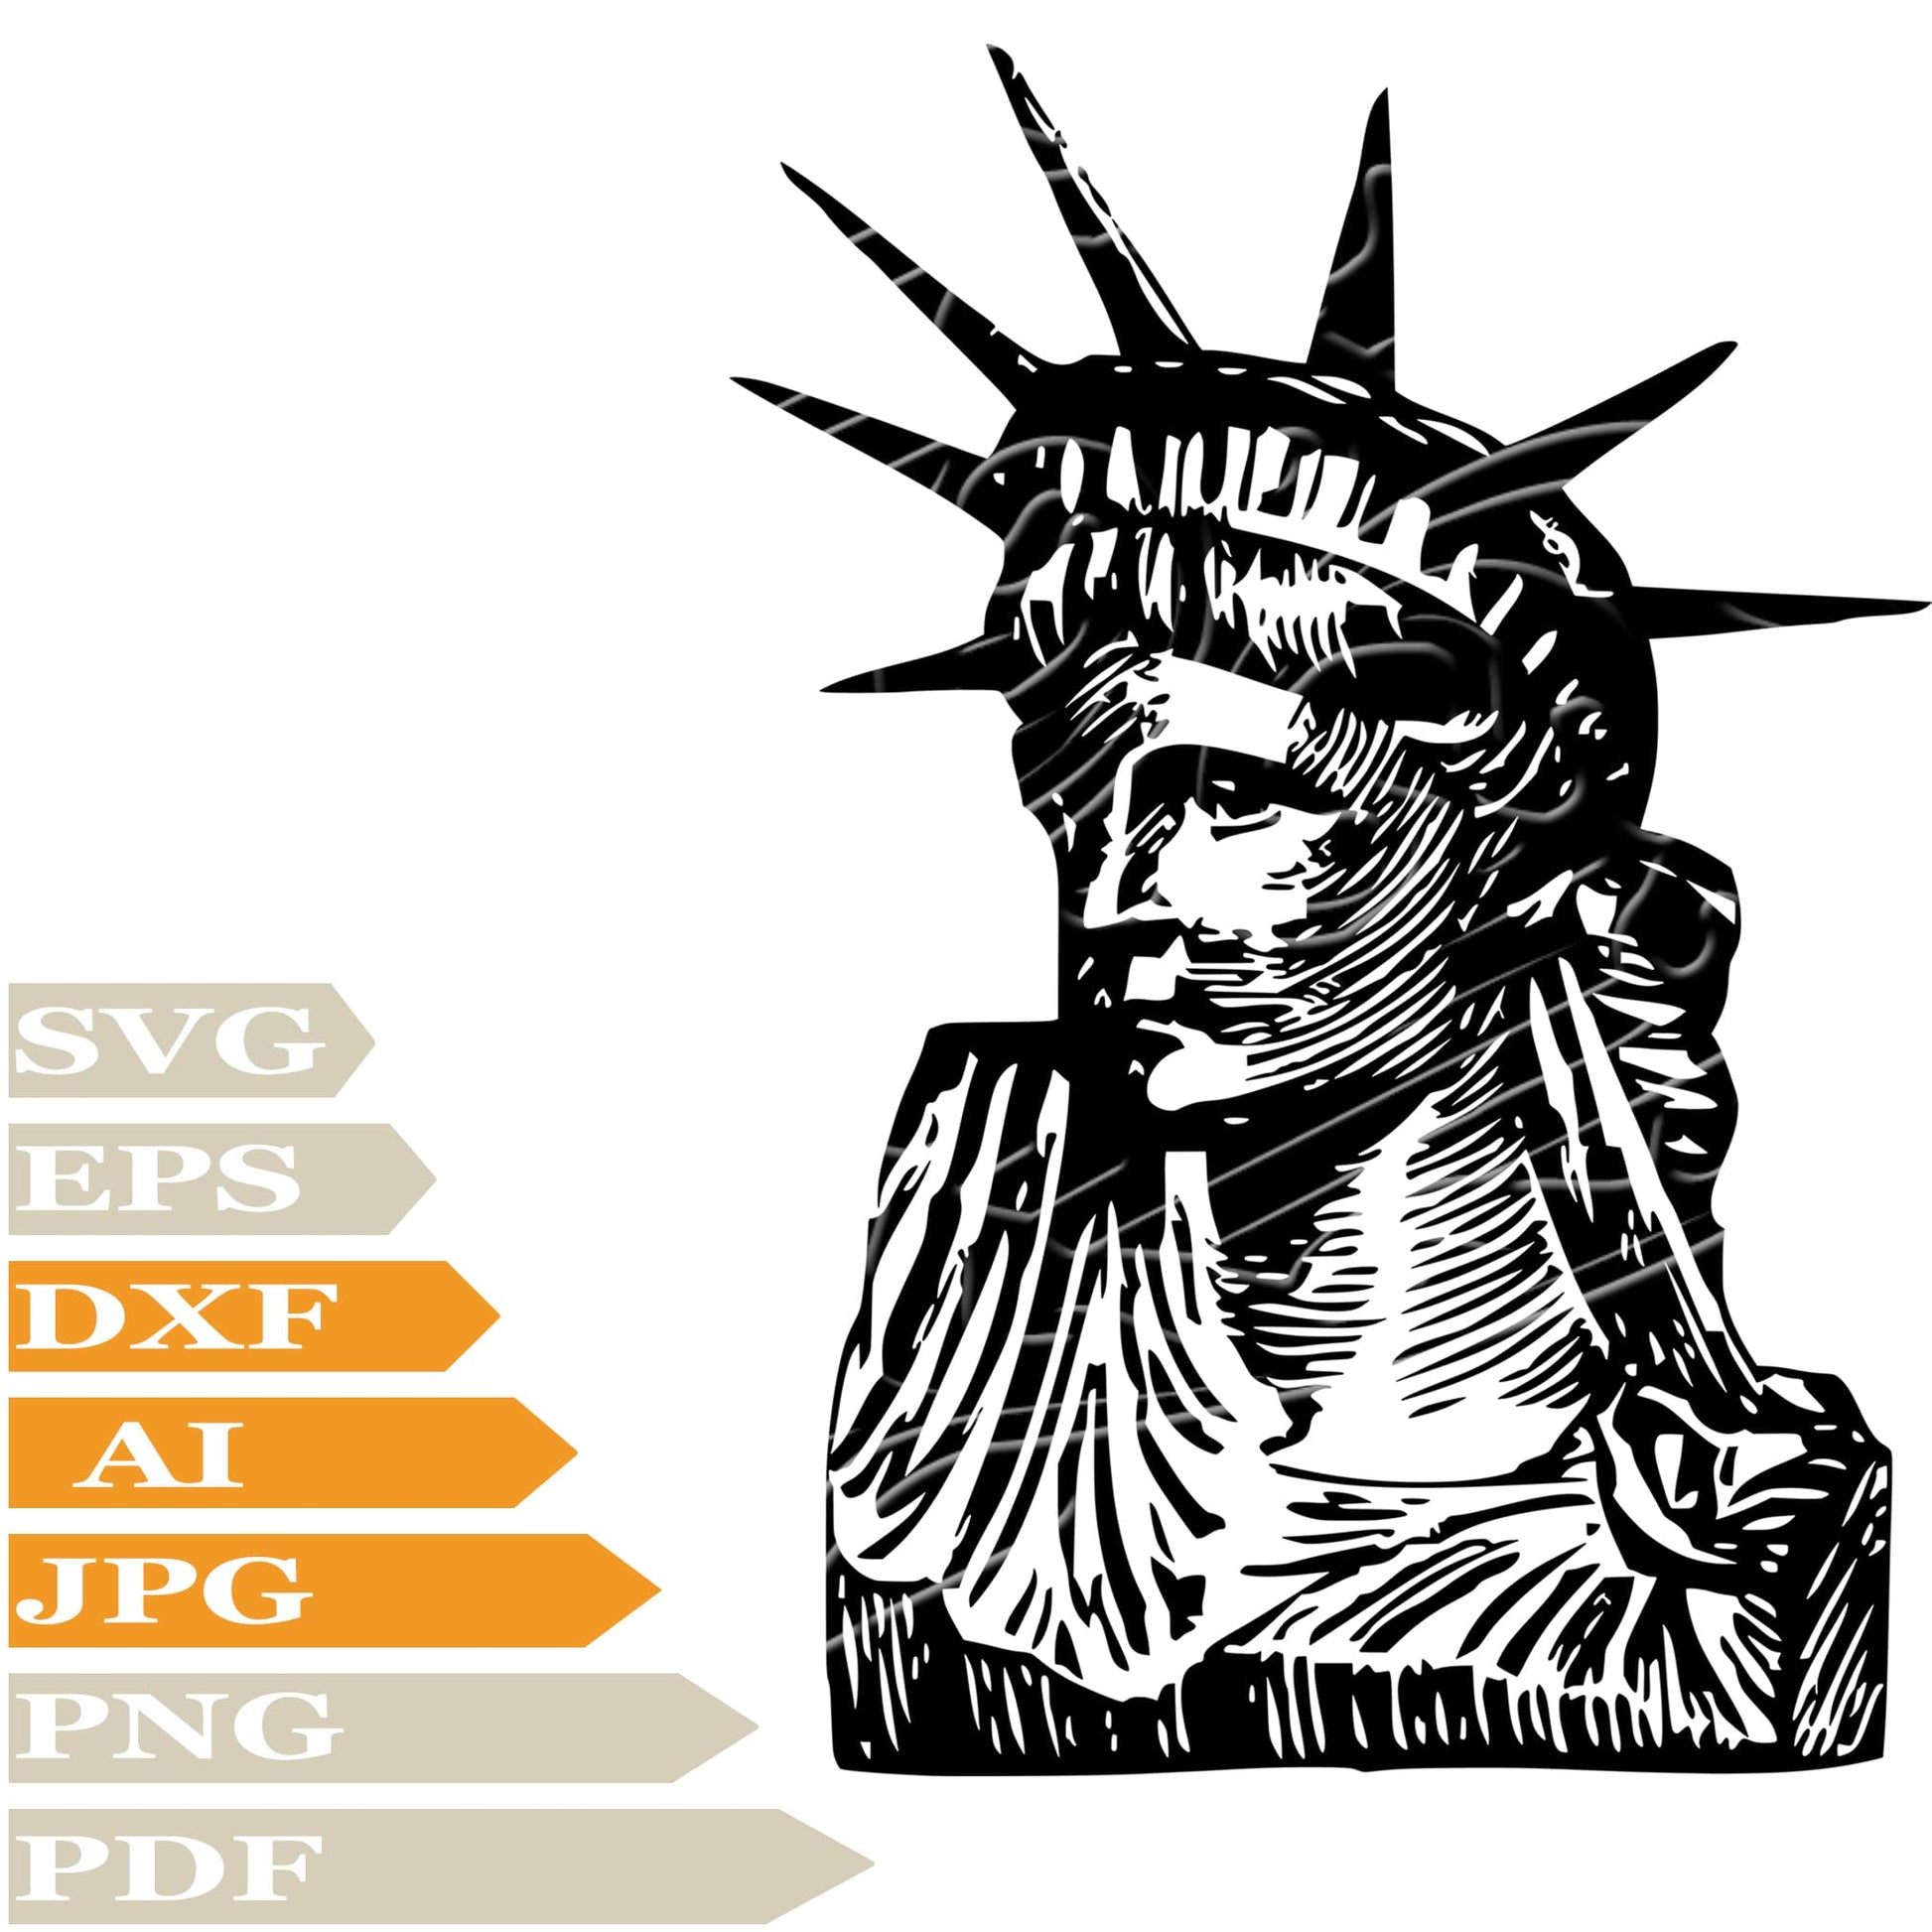 America, Statue Of Liberty Svg File, Image Cut, Png, For Tattoo, Silhouette, Digital Vector Download, Cut File, Clipart, For Cricut